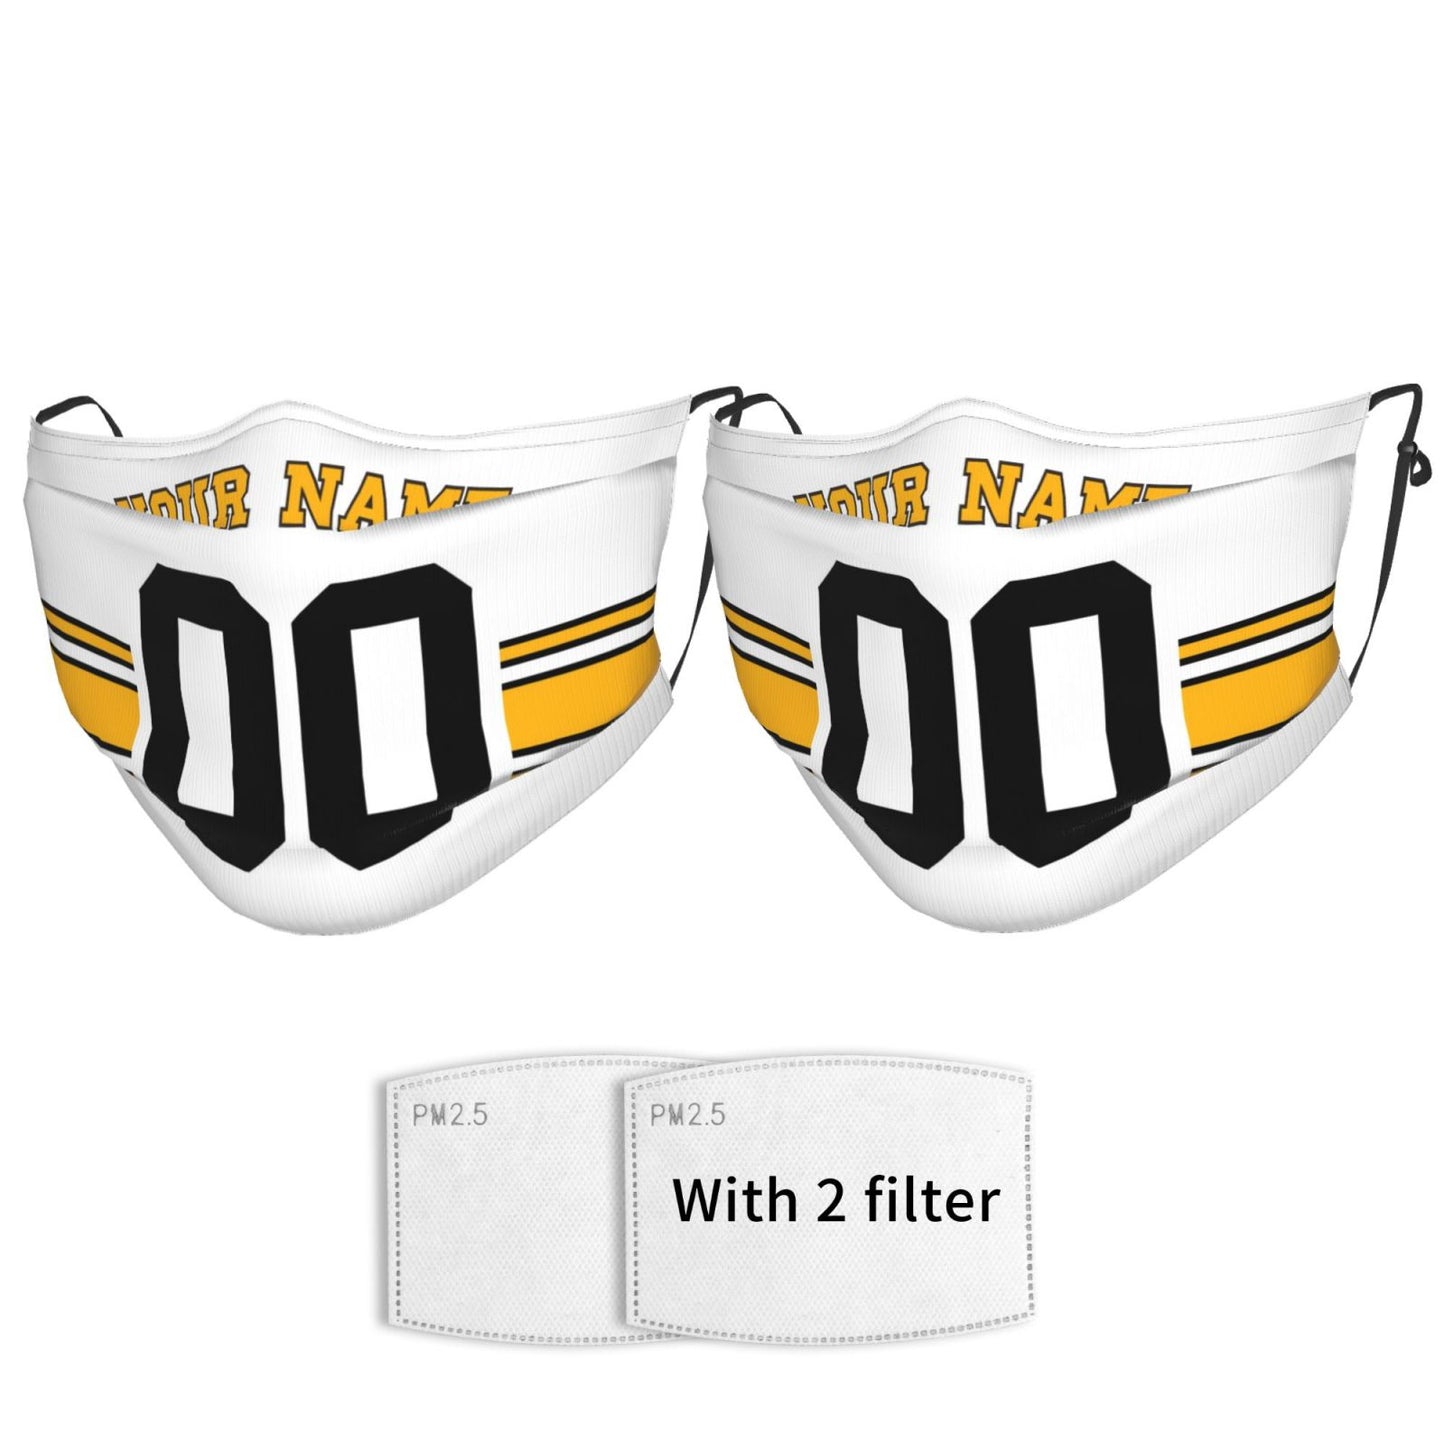 2-Pack Pittsburgh Steelers Face Covering Football Team Decorative Adult Face Mask With Filters PM 2.5 White